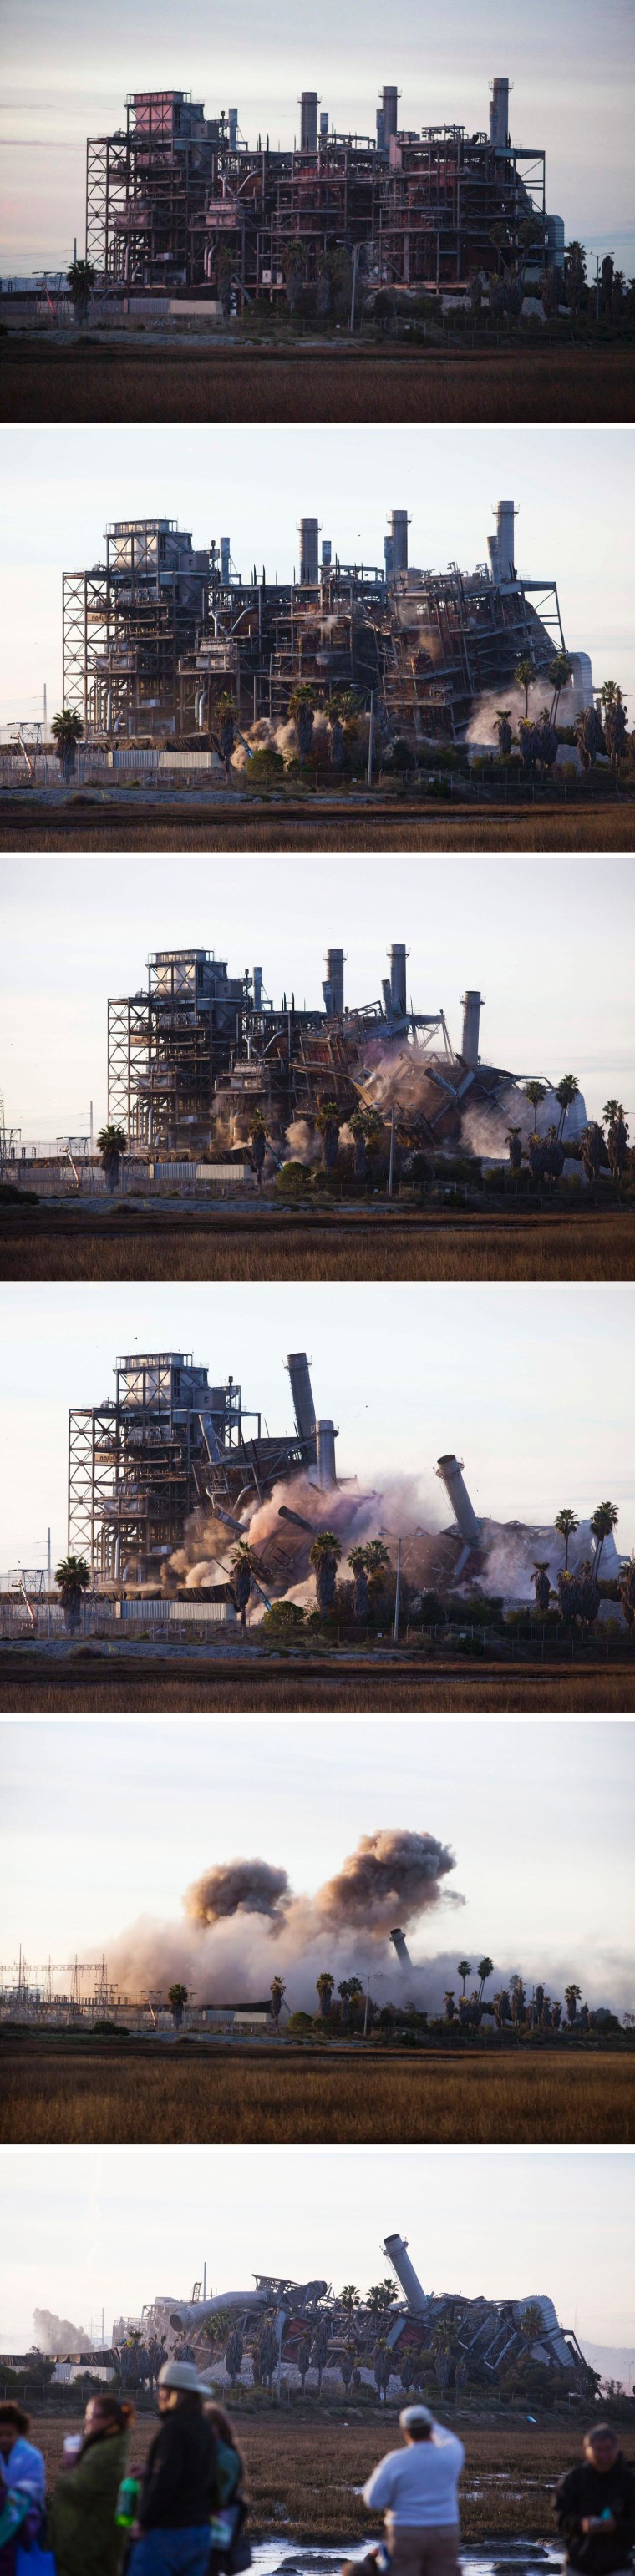 The South Bay Power Plant implodes in Chula Vista, California on February 2.